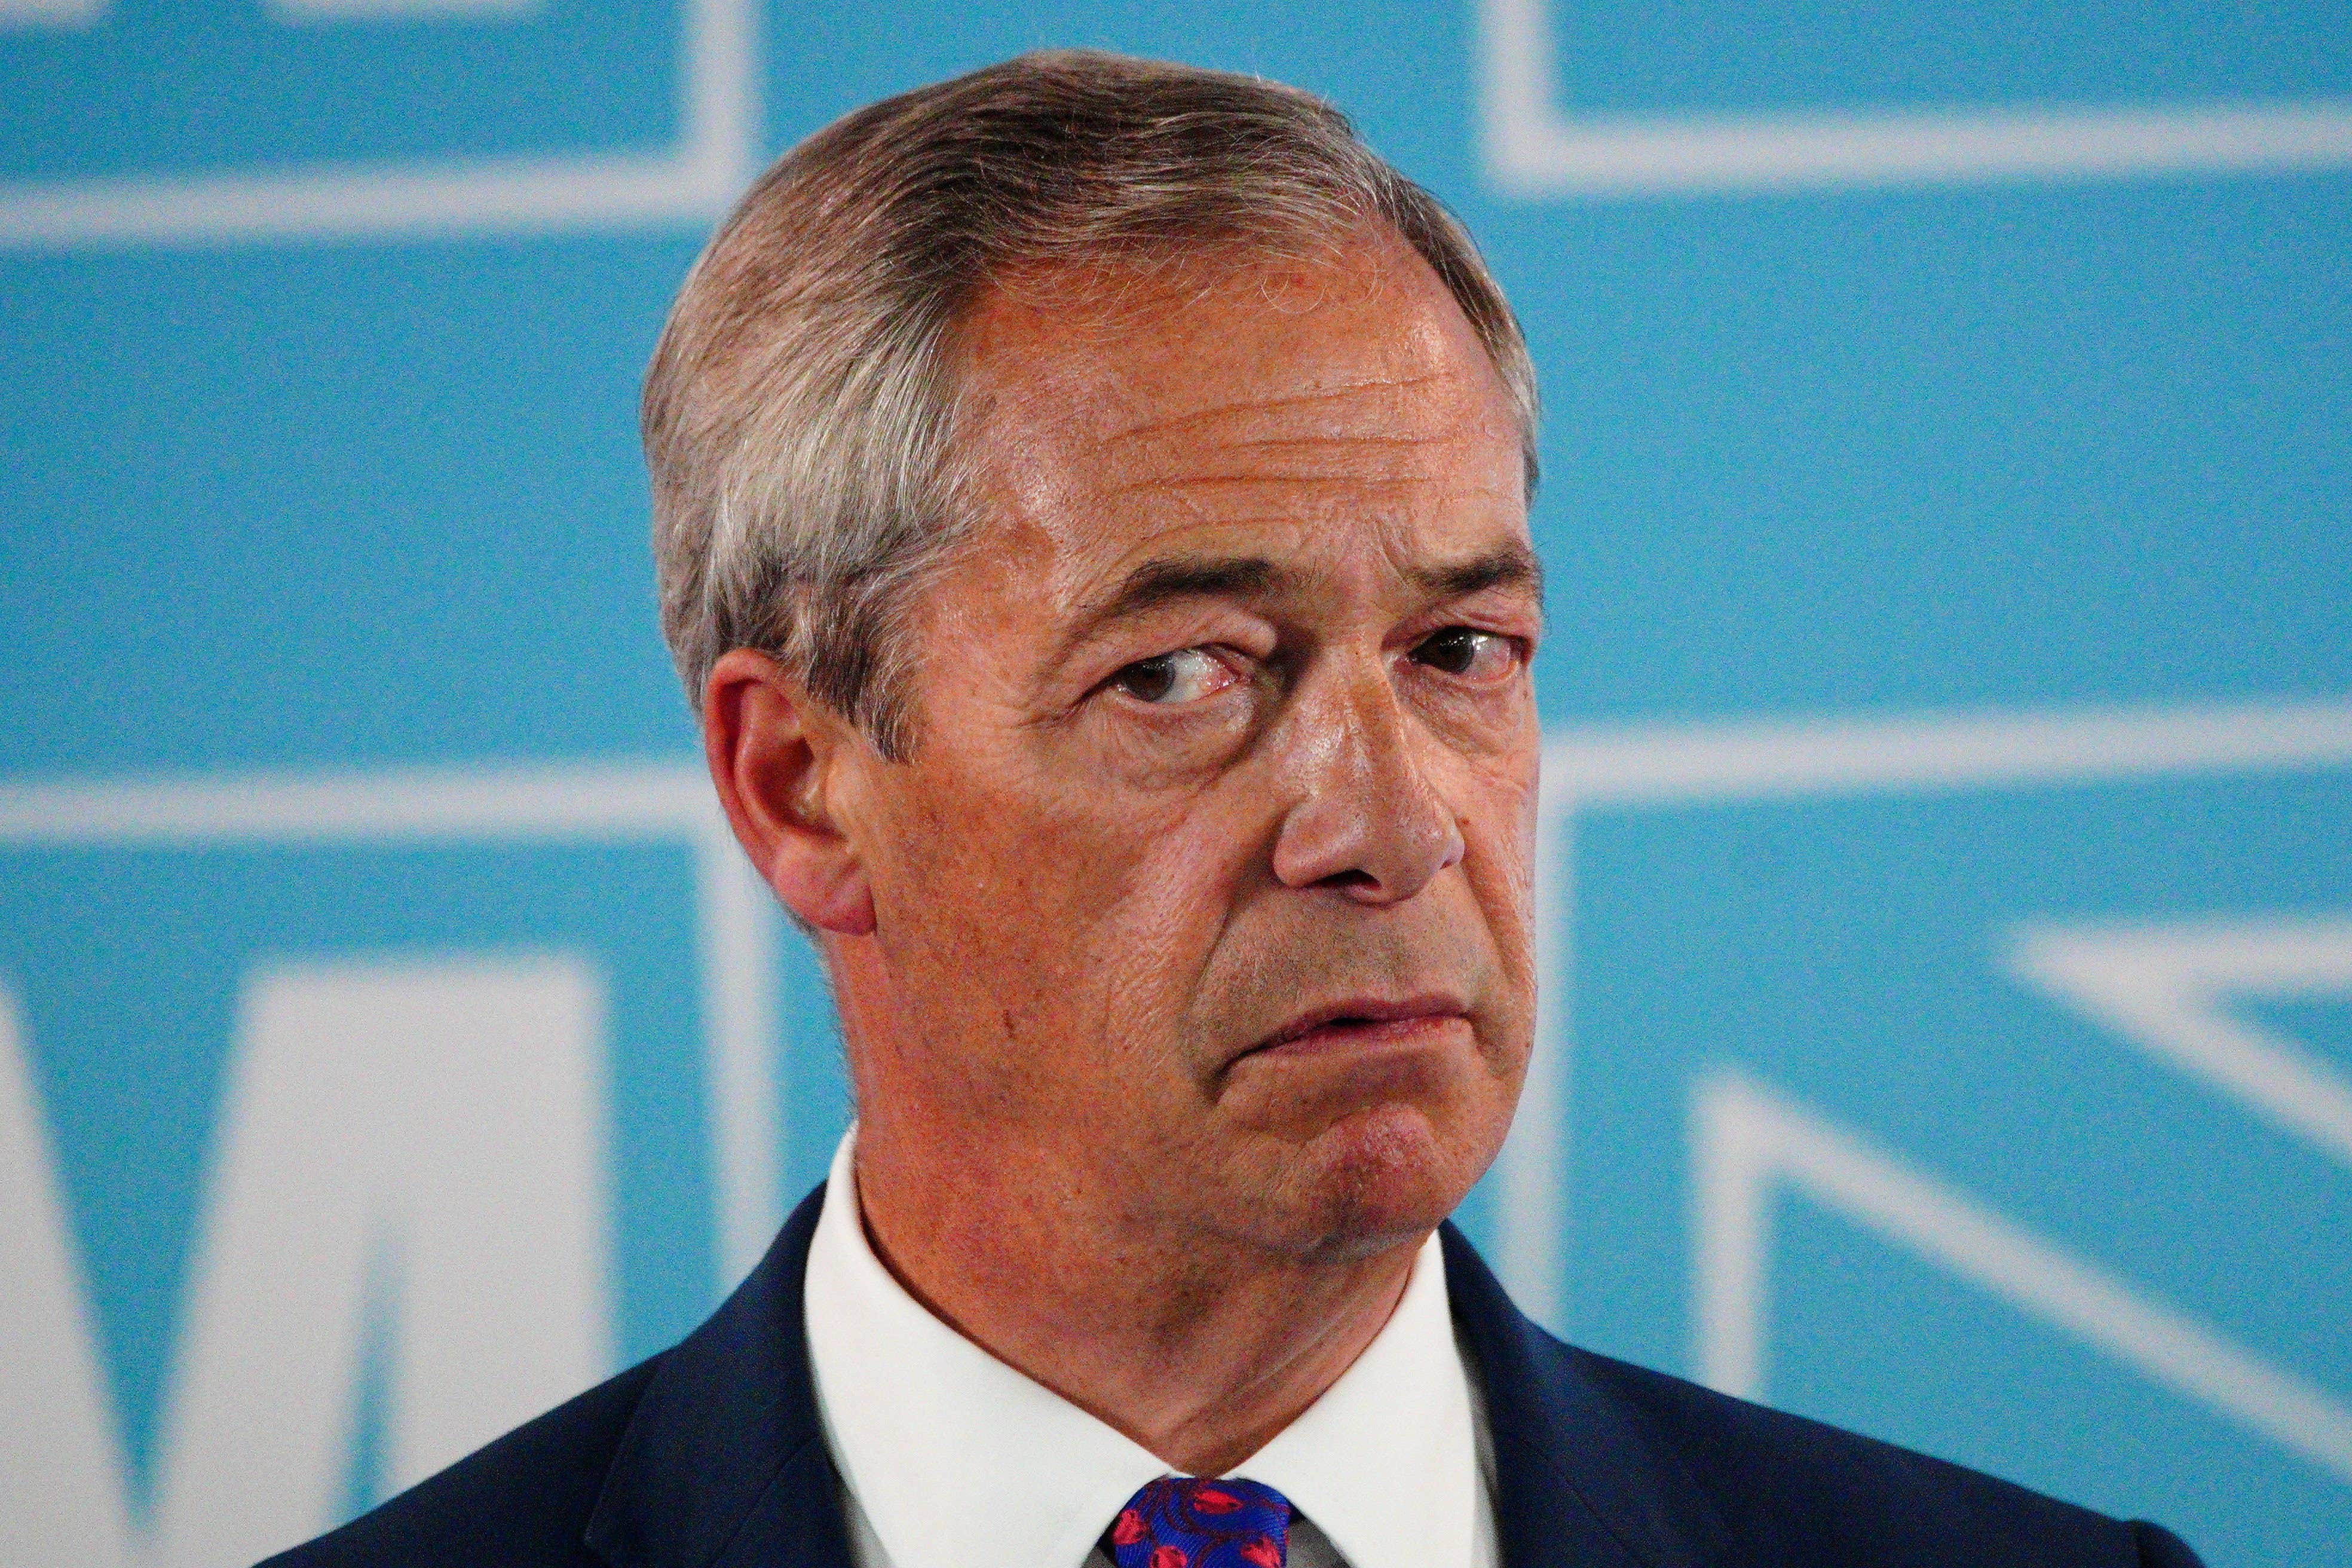 Reform UK leader Nigel Farage said his party paid a large sum of money to a company to vet candidates but has been let down (Ben Birchall/PA)